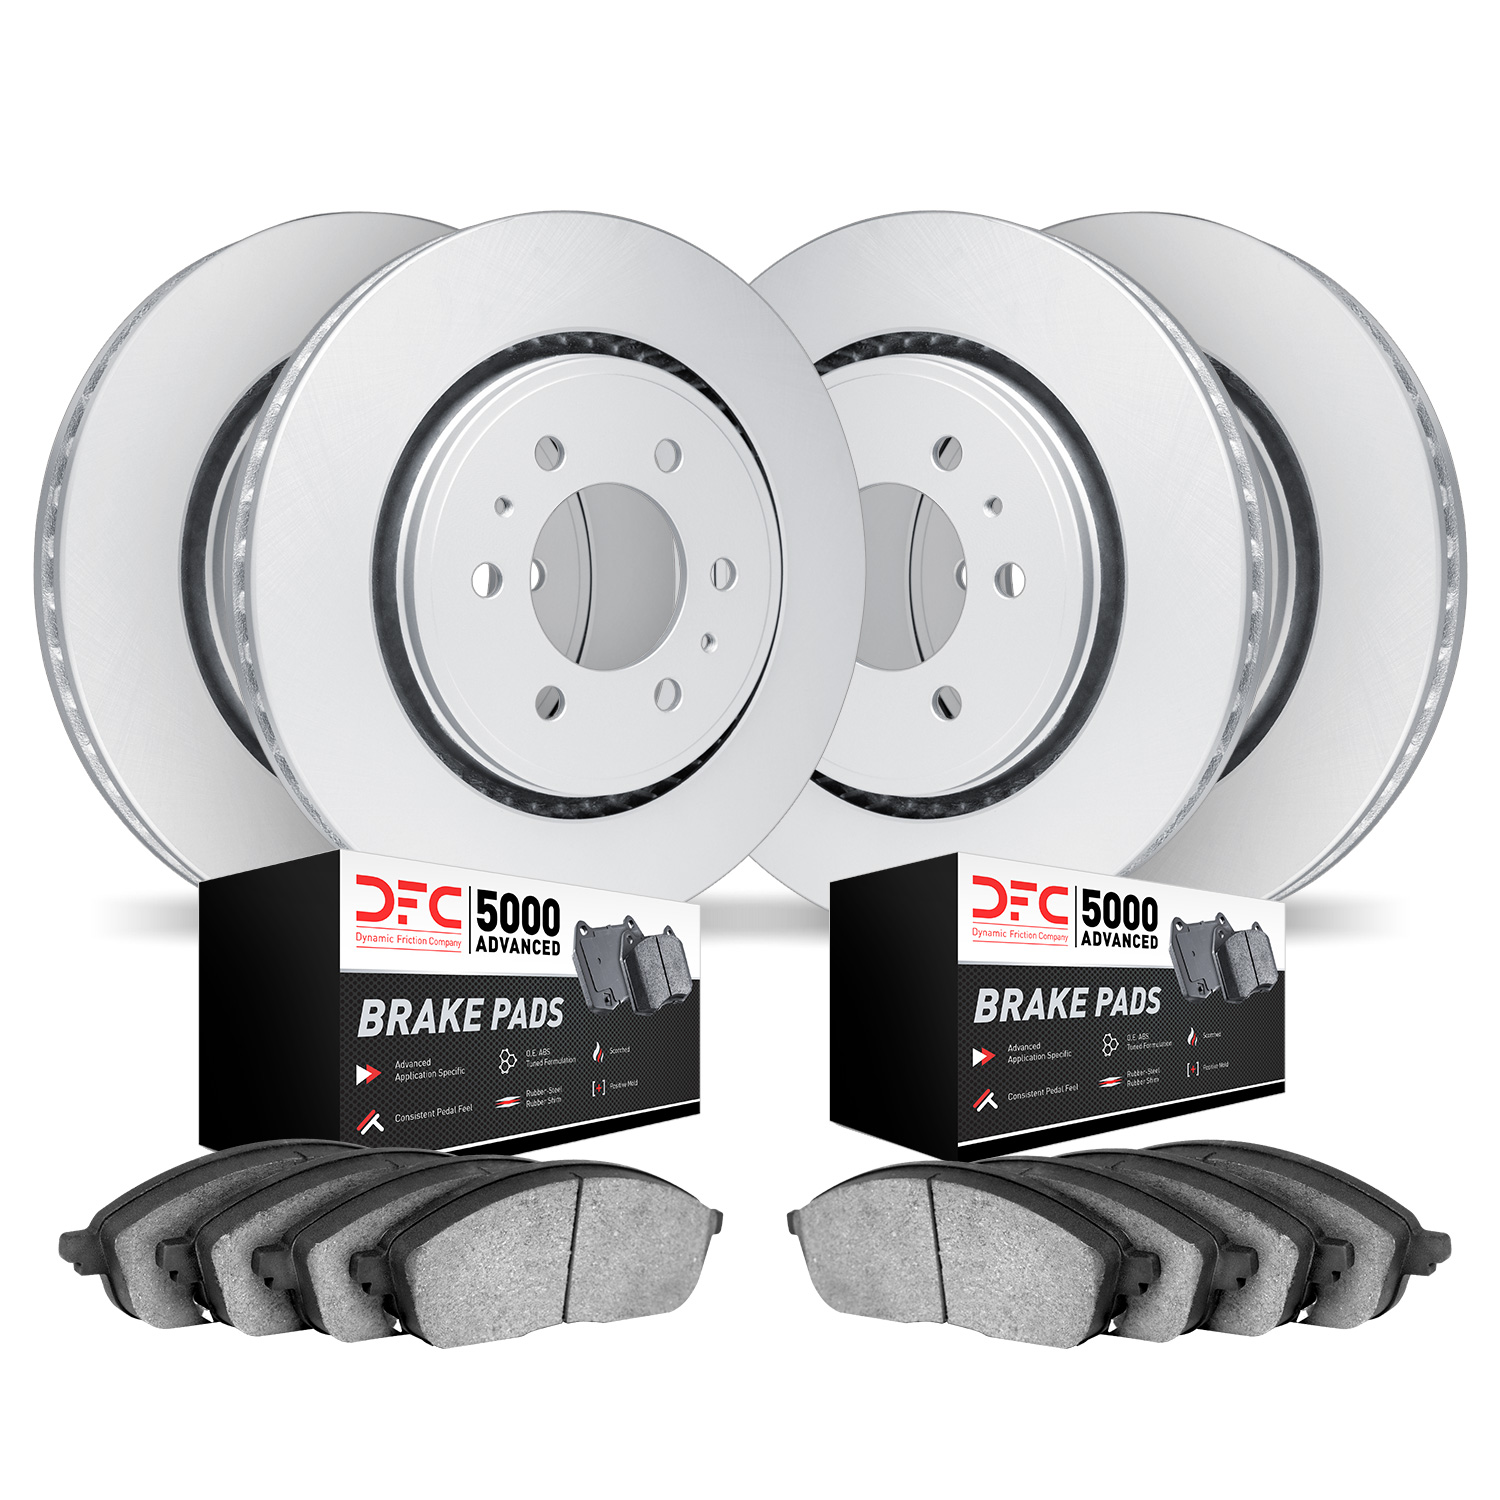 4504-54300 Geospec Brake Rotors w/5000 Advanced Brake Pads Kit, Fits Select Ford/Lincoln/Mercury/Mazda, Position: Front and Rear